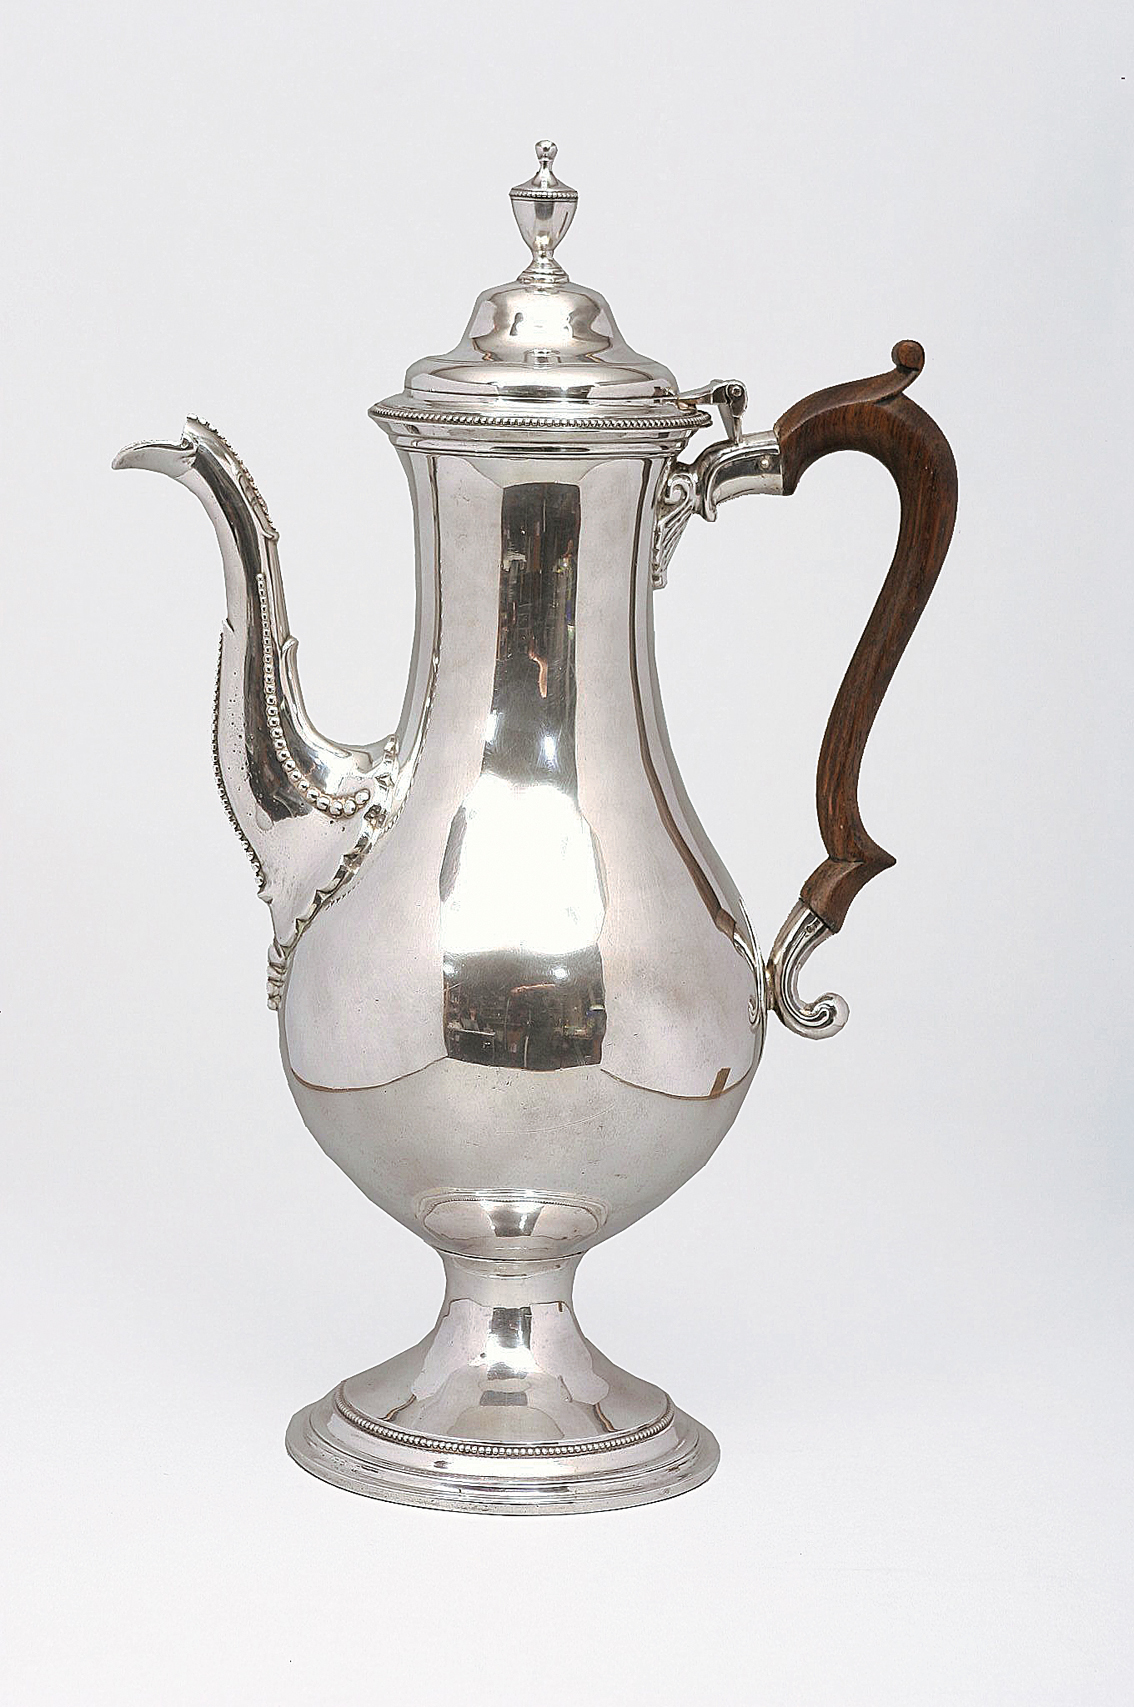 A large English coffee pot with noble coat of arms